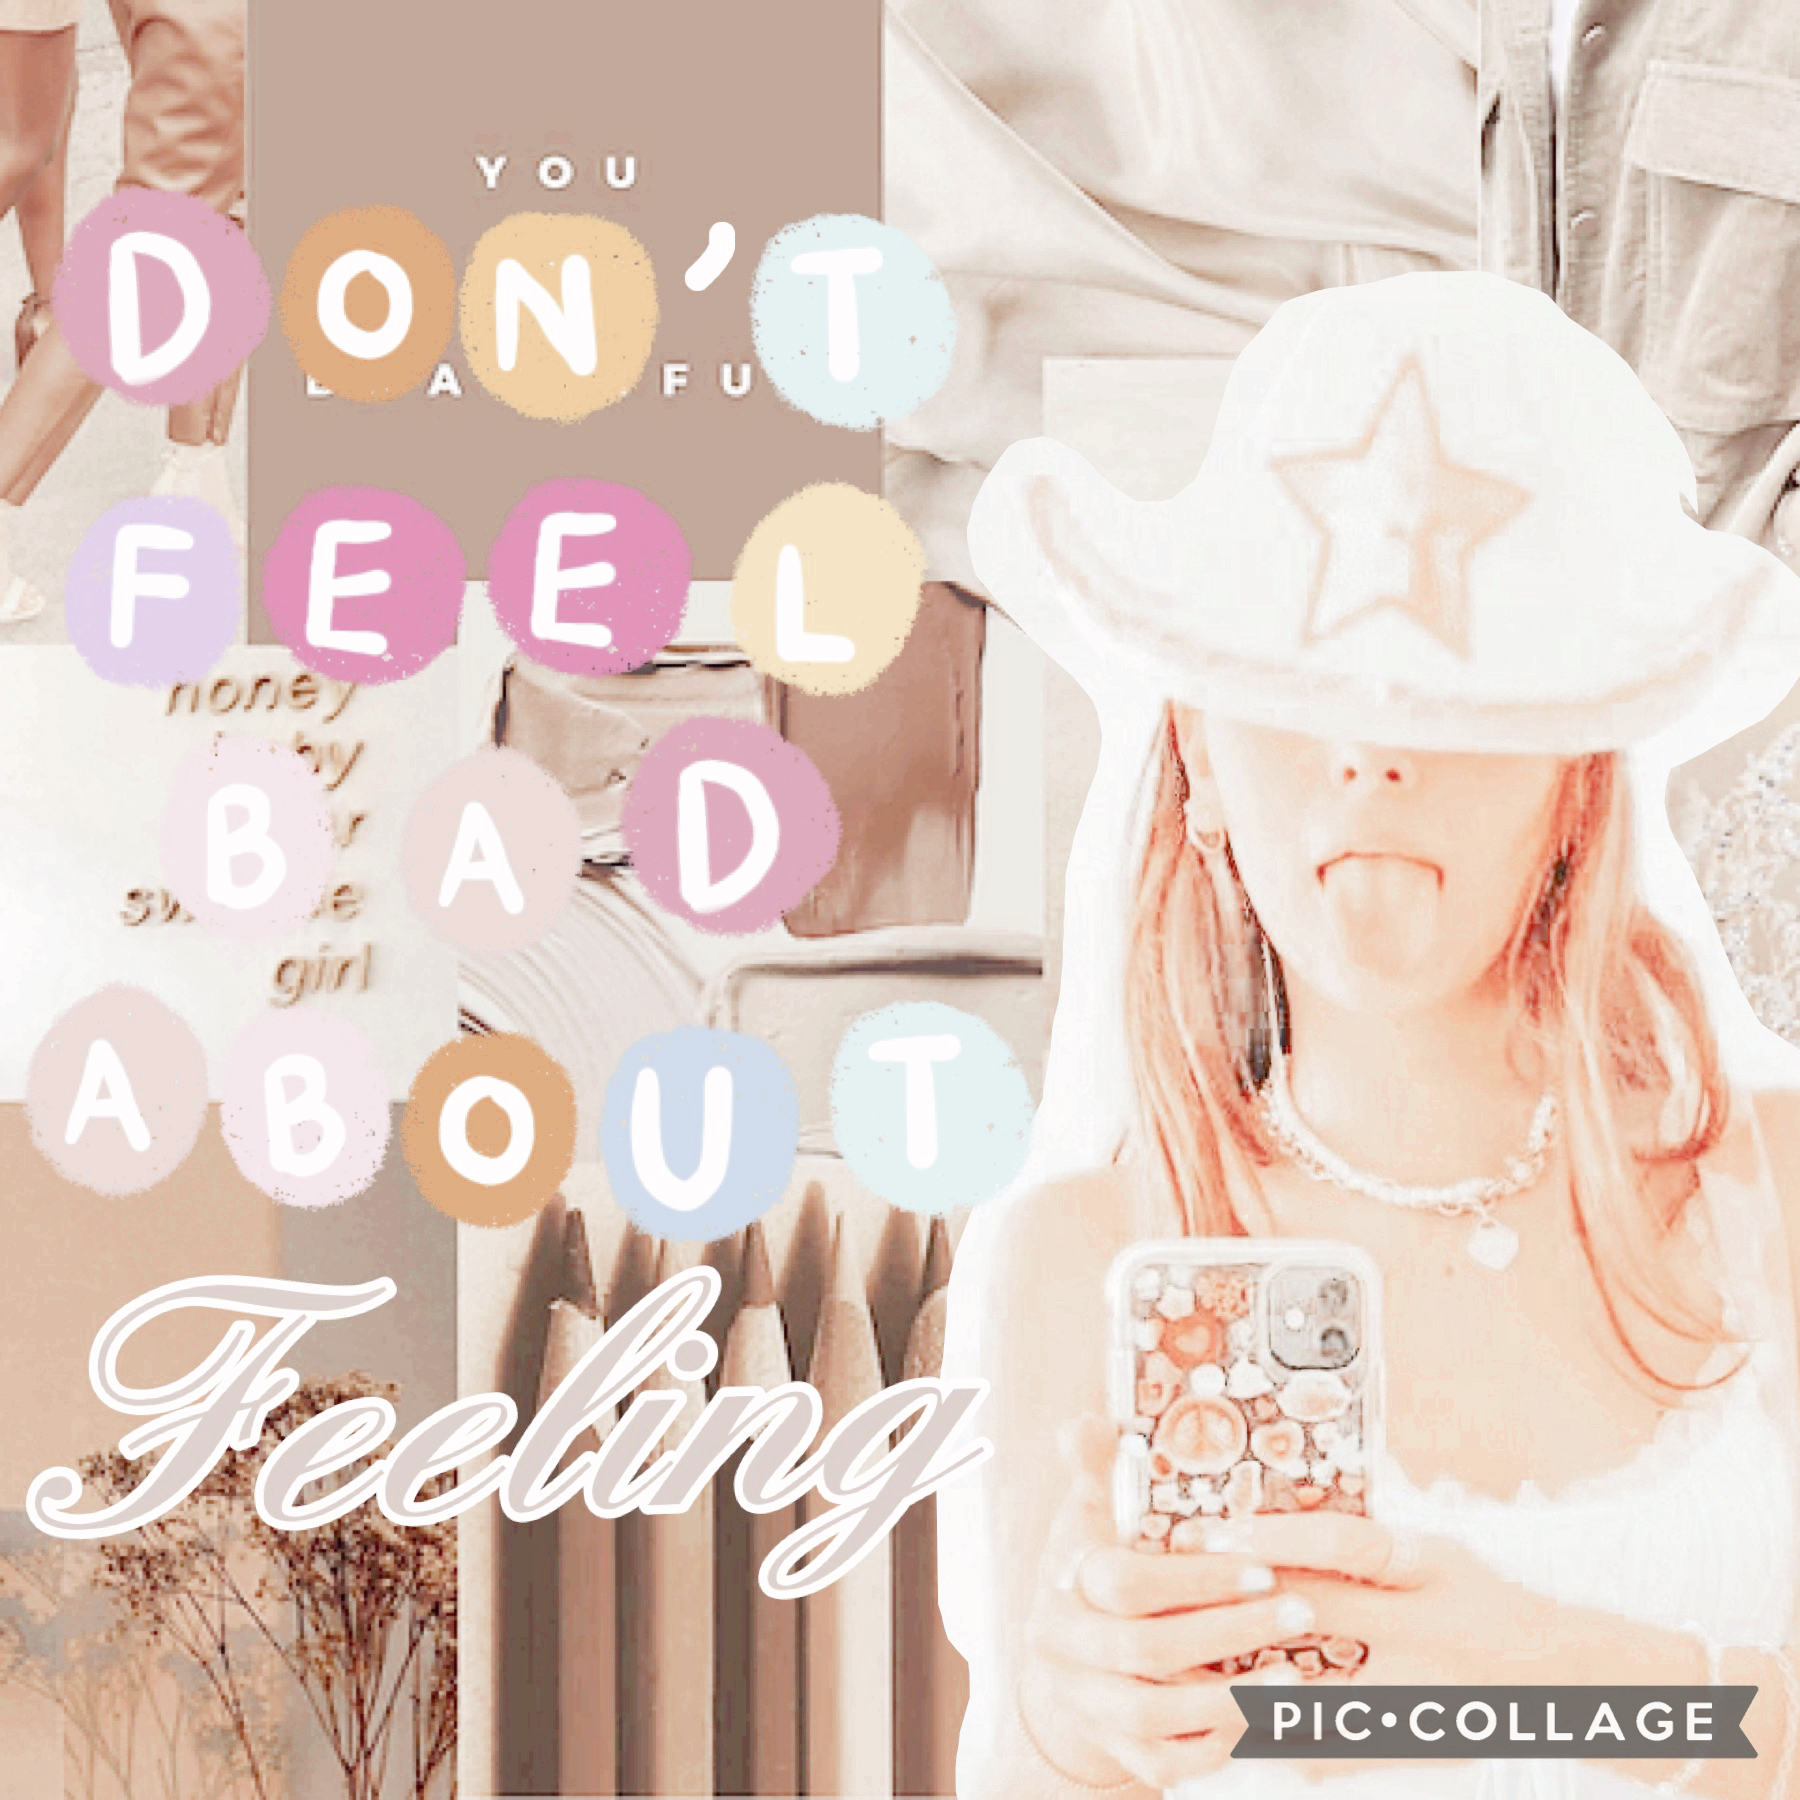 💋8 • 17 • 22💋 (tap!)
Hey guys! Thank you all for supporting me!
I really appreciate it :)
This is a classic quote 😗
And it’s pretty basic. I hope to 
Get more ideas! Luv ya’ll!! 💕